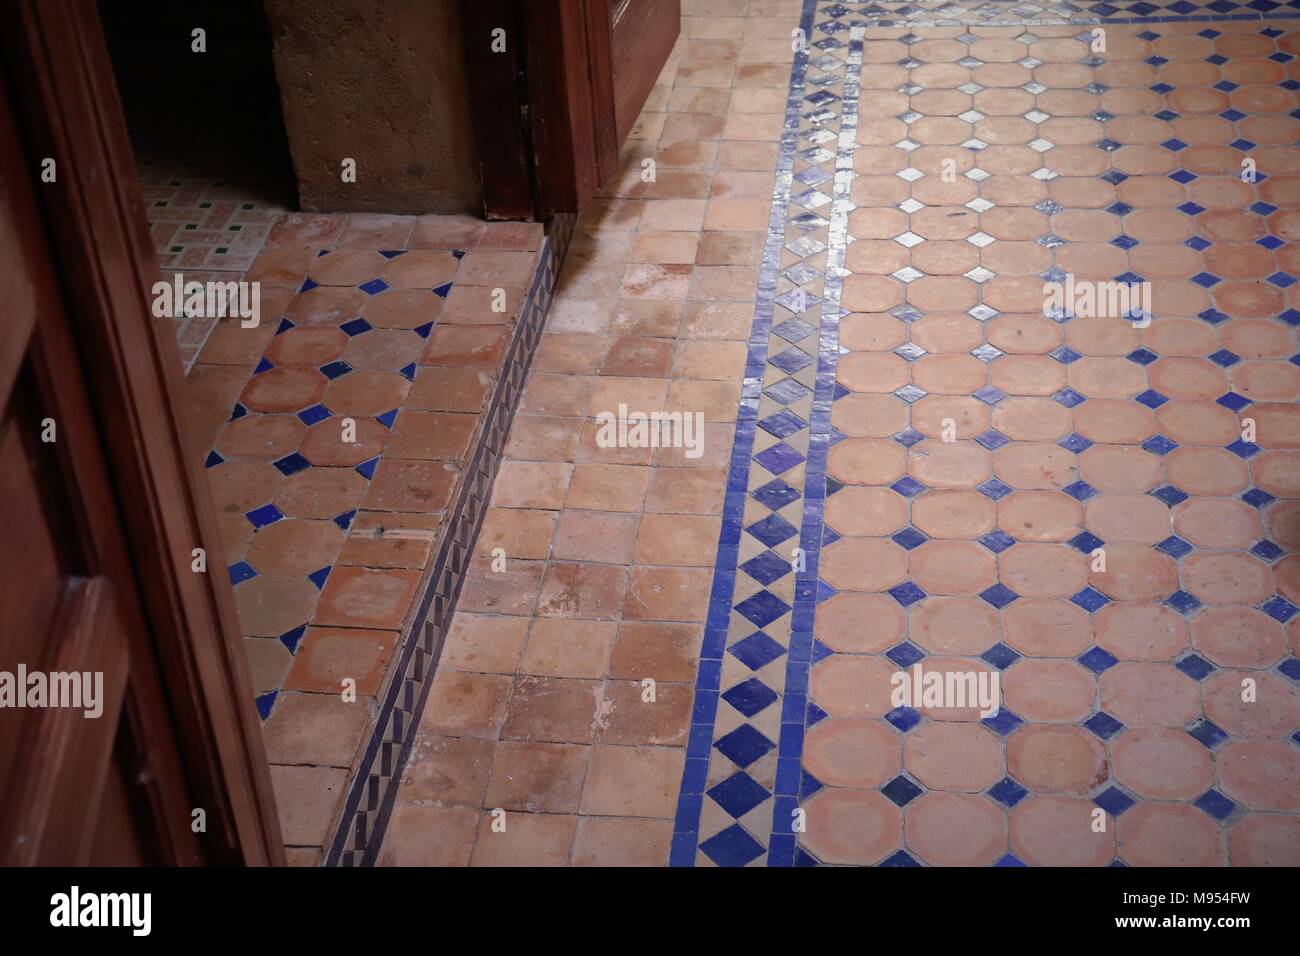 Decorative tiled flooring in a Moroccan Riad in tones of terracotta and blue Stock Photo